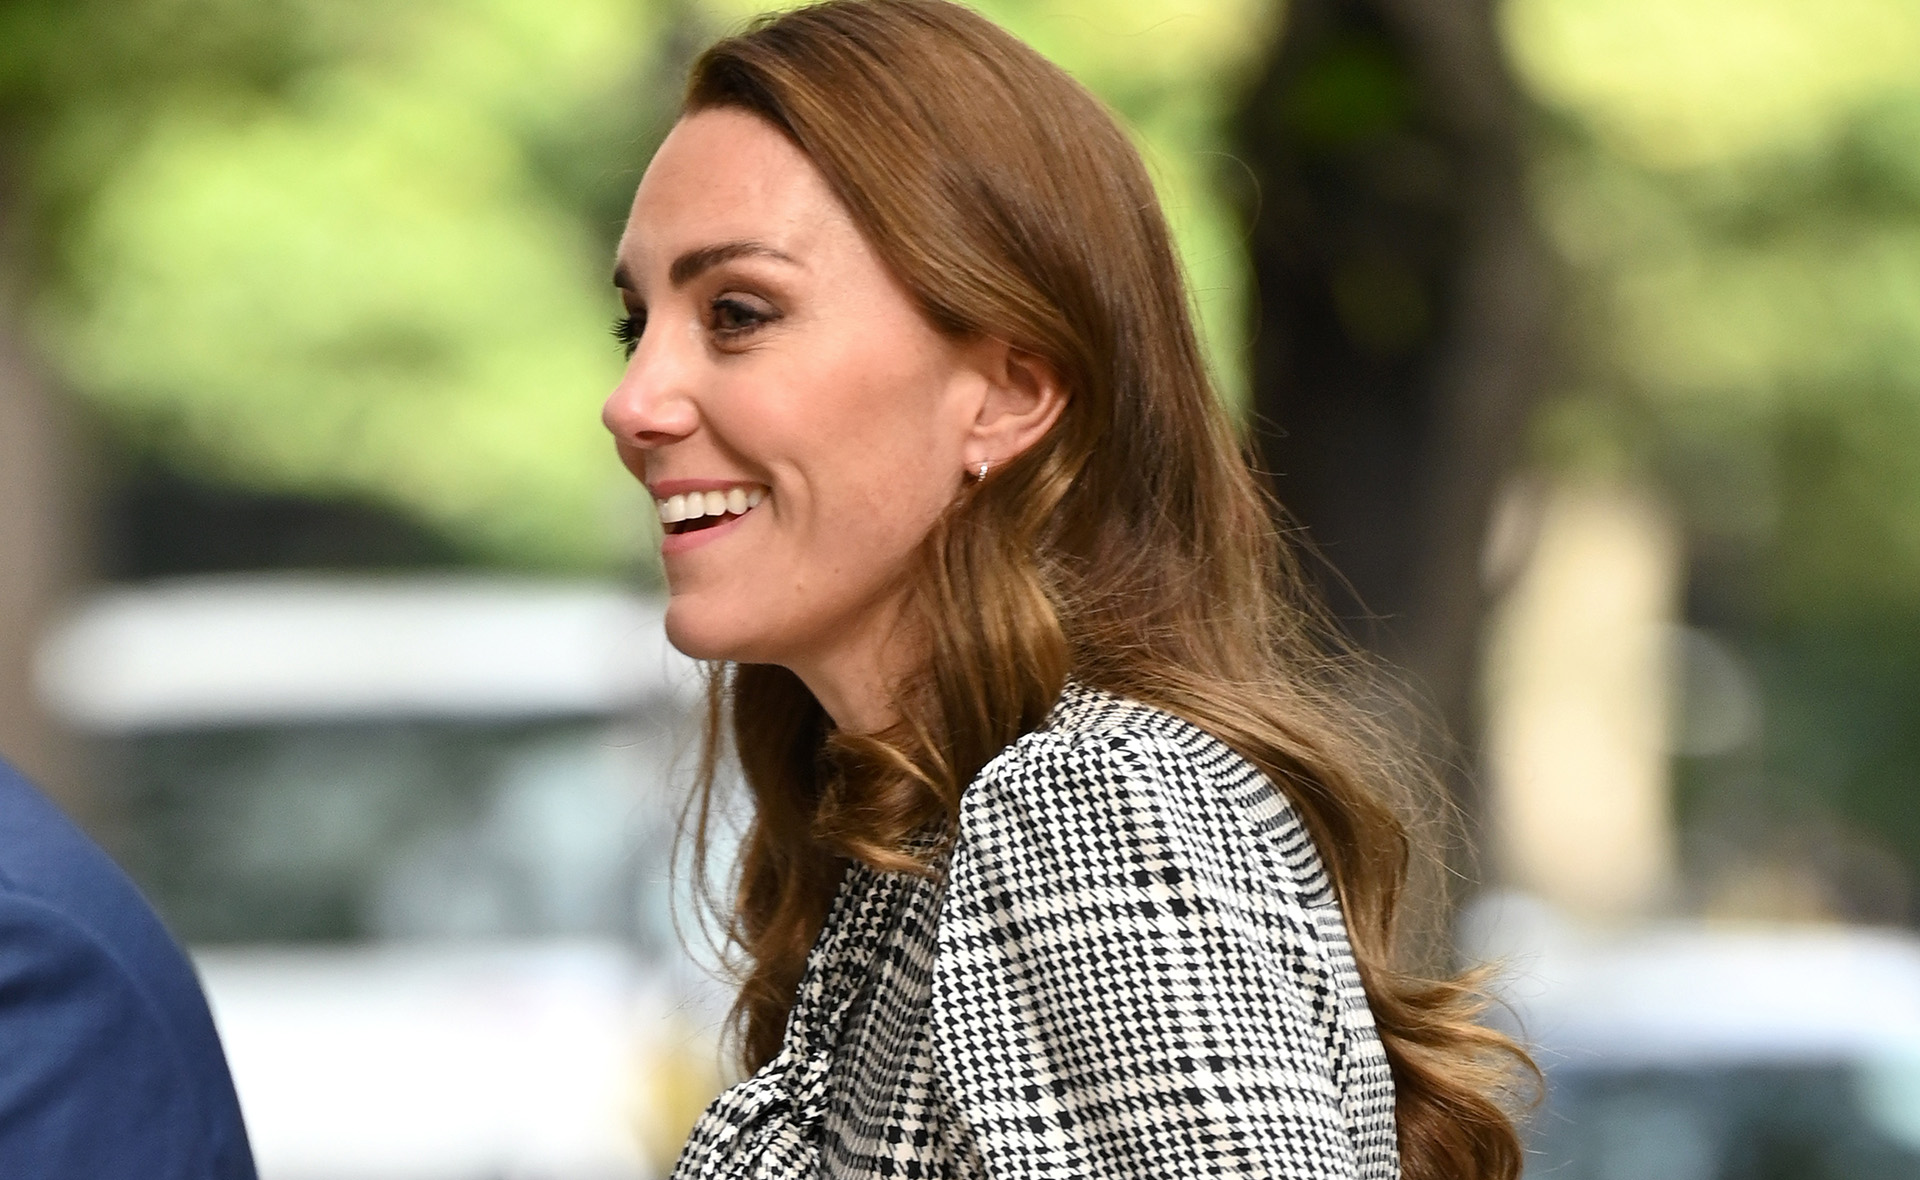 Duchess Catherine proves you can be stylish on any budget in a chic $30 Zara frock